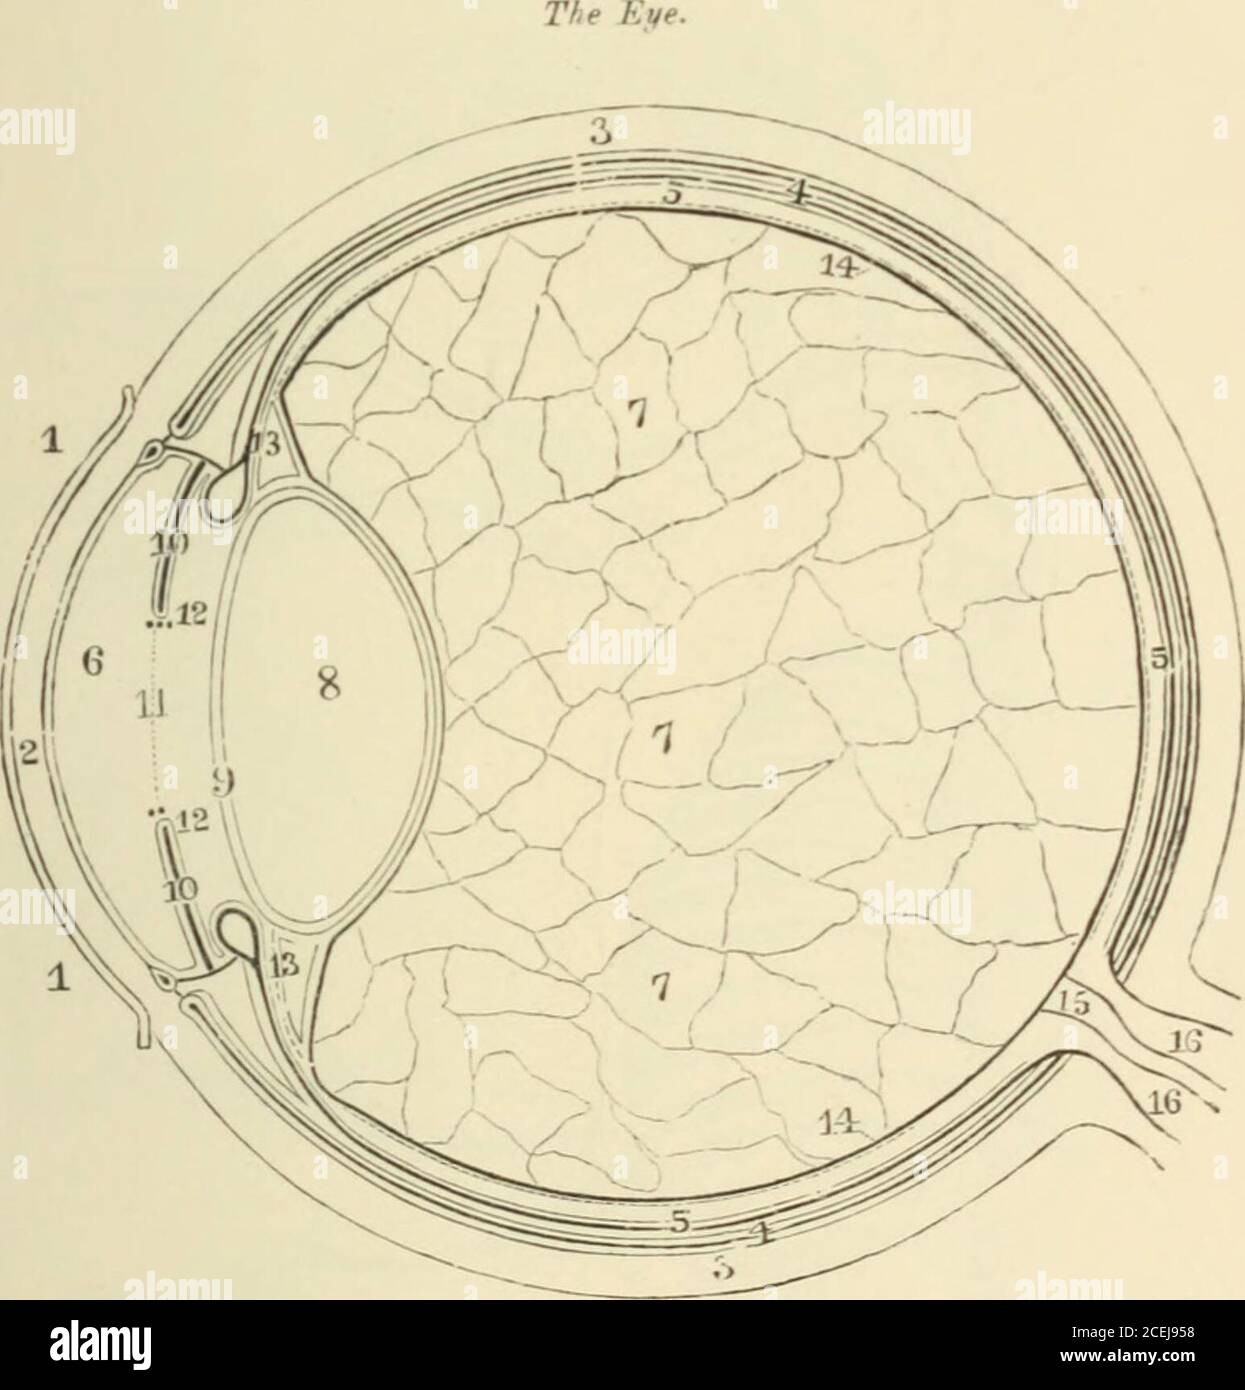 . Horses and stables. A Seat of curb. Pr.ATE 30.. 1. Conjunctiva. 2. Cornea. 3. Sclerotic coat. 4. Choroid coat. 5. Retina. 6. Aqueous humour. 7. Vitreous humour. 8. Crystalline lens. 9. Capsule of lens. 10. Iris. 11. Pupillary opening. 12. Corpora nigra. 13. Ciliary ligament. 14. Hyaloid membrane. 15. Optic nerve. 16. Arteries and veins. PlATK 31. bn u c . .JJ ■^ ti ... o 2 ■? .. e = P .2 .£ o ■ S..S ^ S .- &lt;iJ s • S GniOM OS u ^ 3 J; eo ^ in a 5 g g p .n :2 I DOS 3 £ a ;= n o Stock Photo